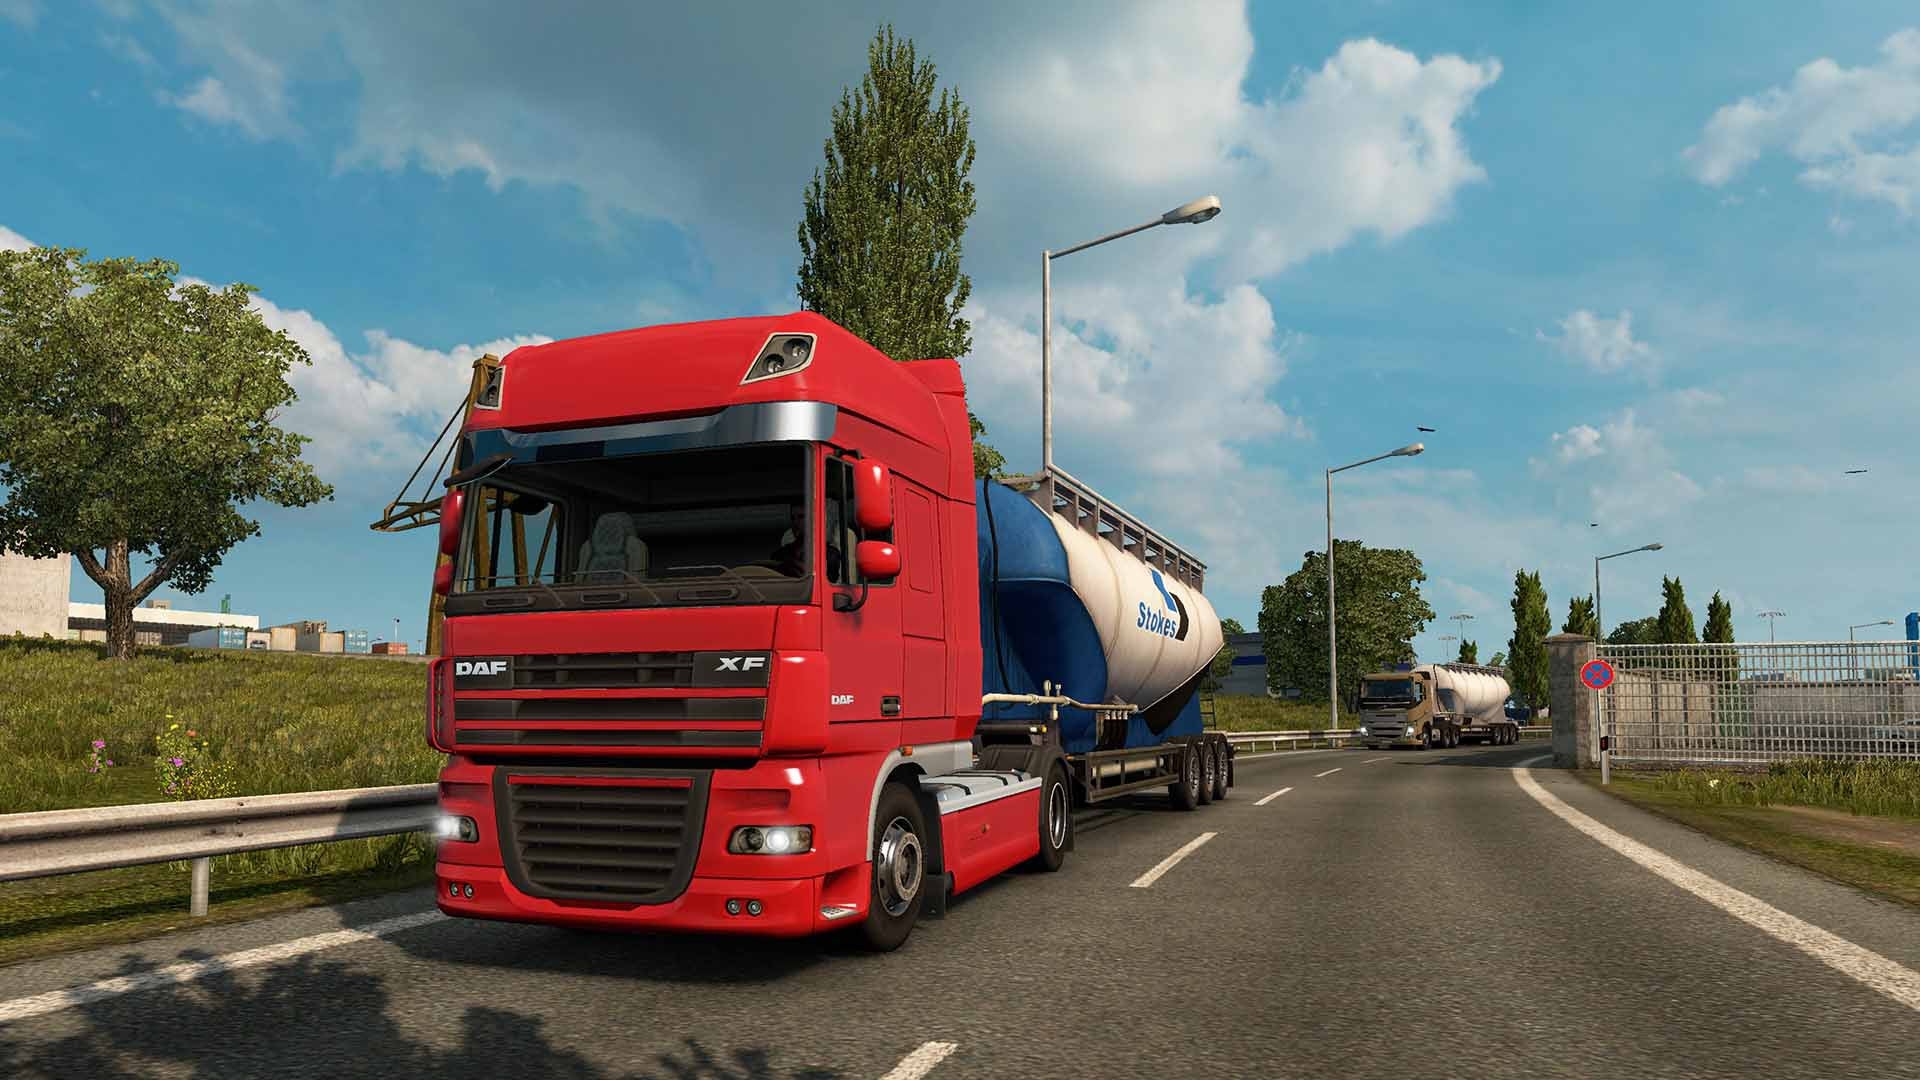 PS4 features and games Euro truck simulator 2 gameplay [HD] 